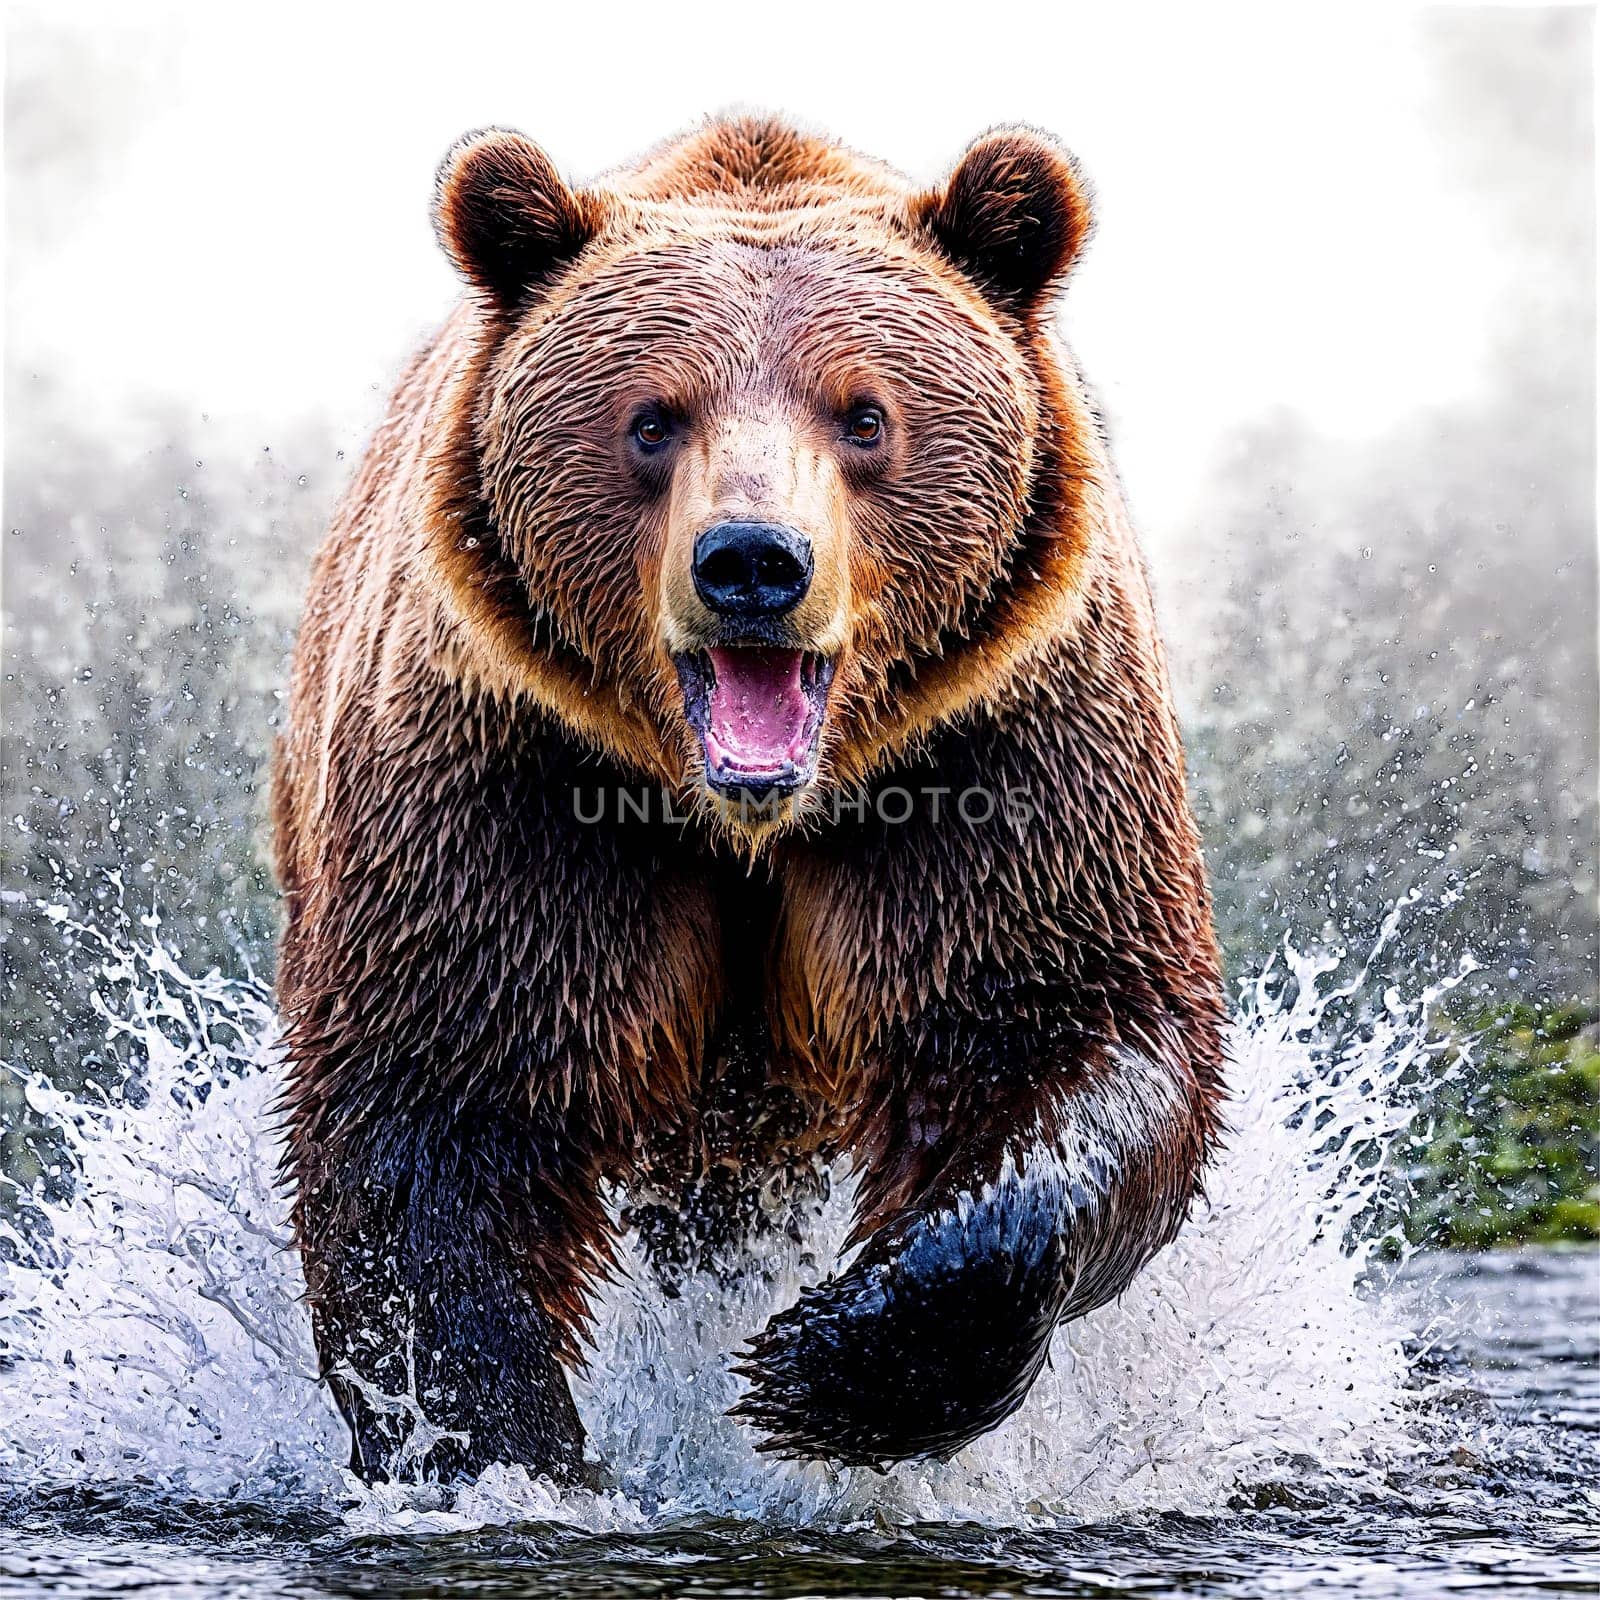 Powerful grizzly bear Ursus arctos horribilis catching salmon water splashing majestic pose Animal photography by panophotograph